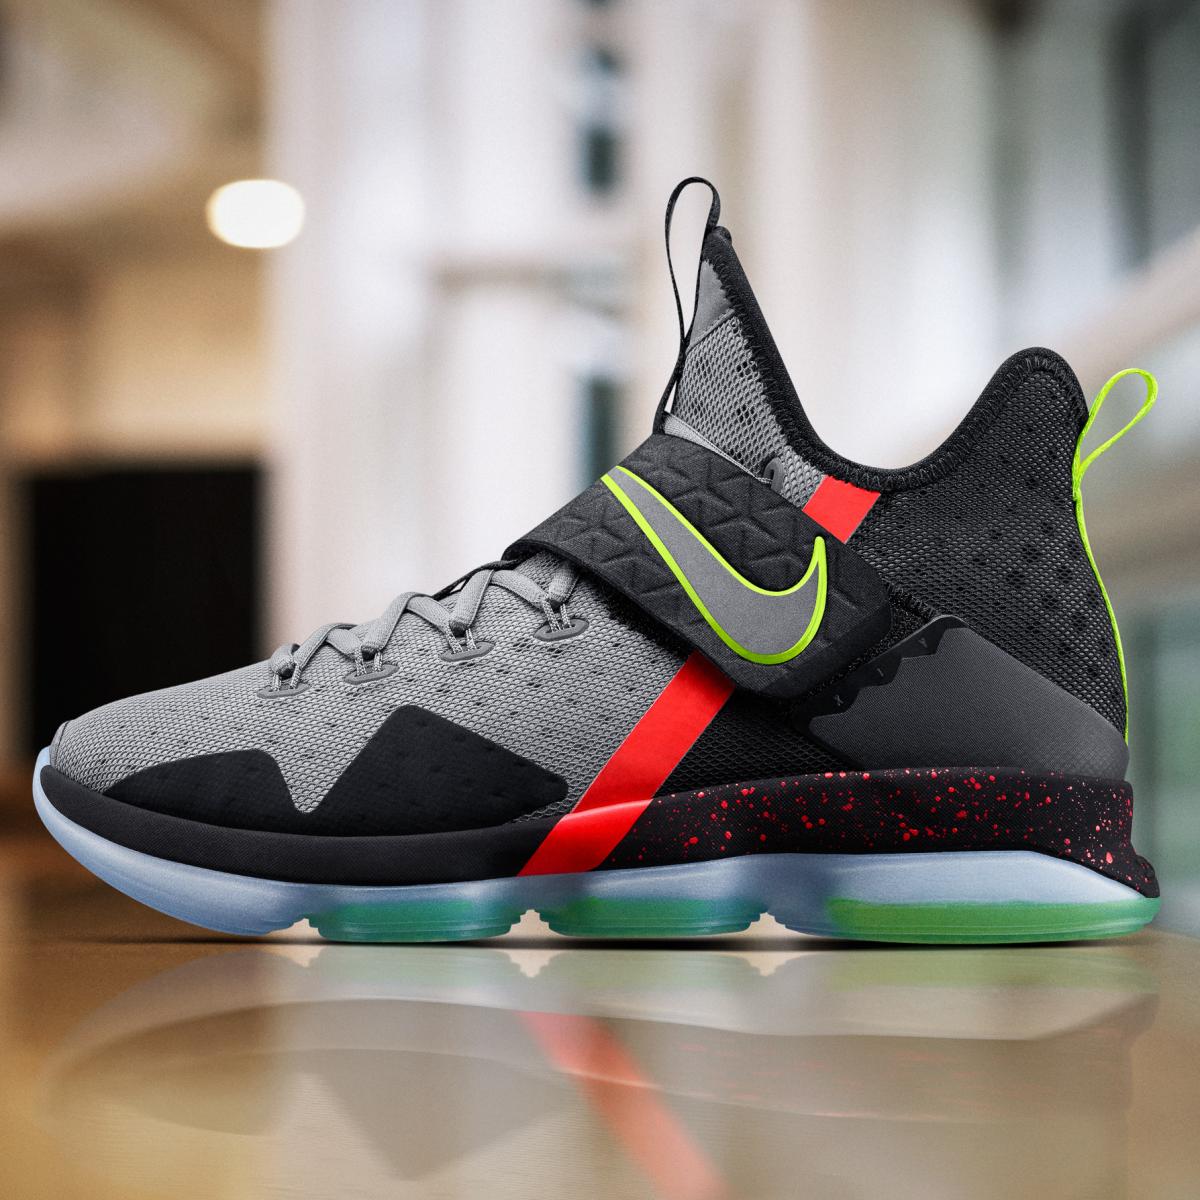 LeBron James, Kyrie Irving, Carmelo Anthony Debut Signature Shoes on Christmas ...